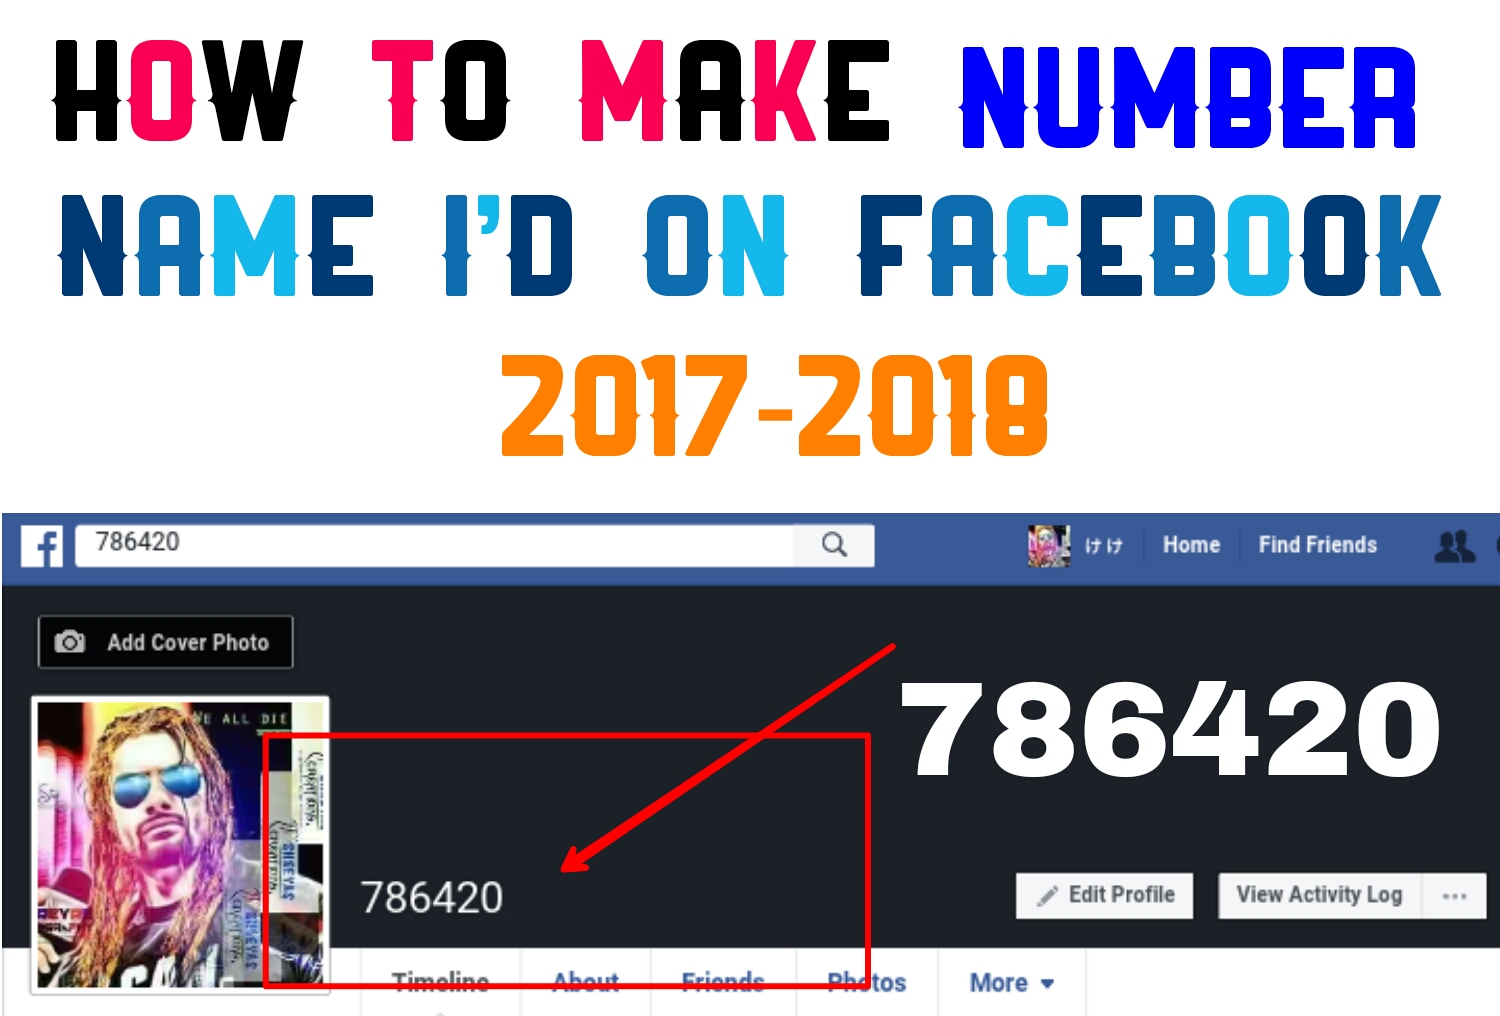 How To Make Stylish Name On Facebook Profile, Facebook Pe Stylish Name Kaise  Likhe 2021, How To Make Stylish Name On Facebook Profile, Facebook Pe Stylish  Name Kaise Likhe 2021